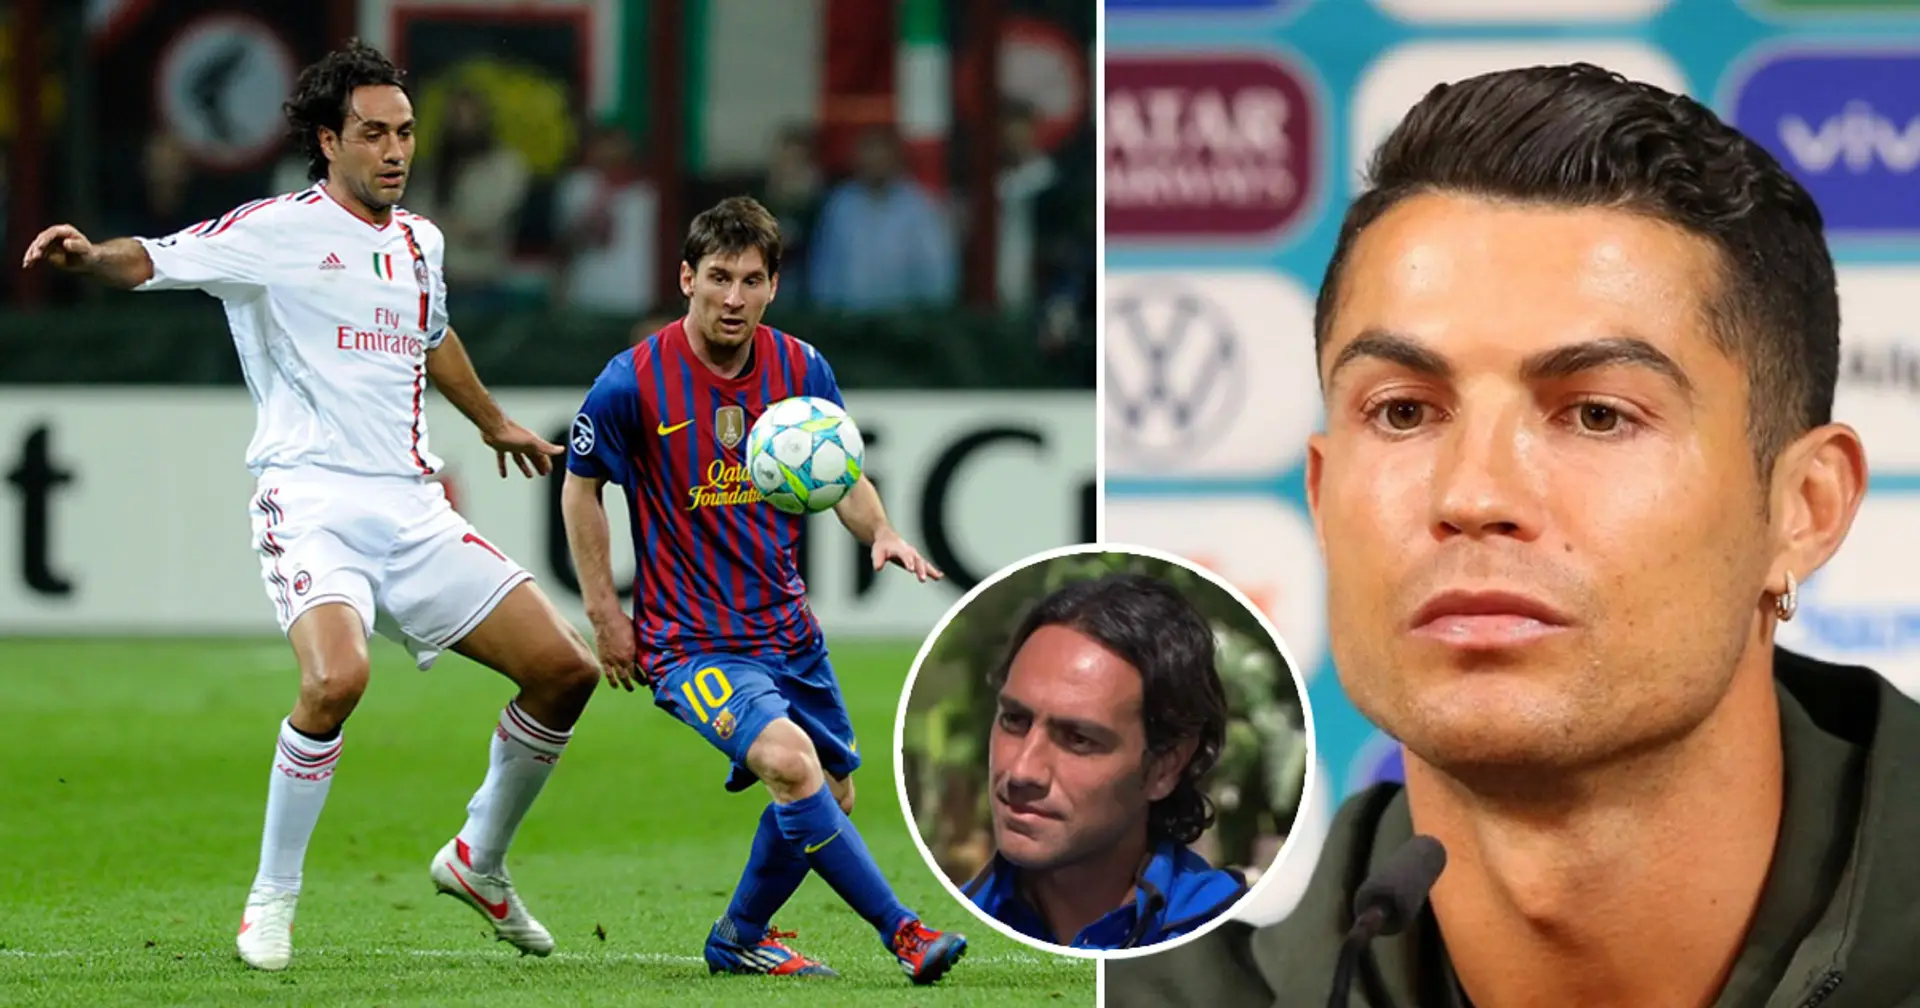 'He mentally destroyed me': Alessandro Nesta recalls incredible story as he weighs in on Messi vs Ronaldo